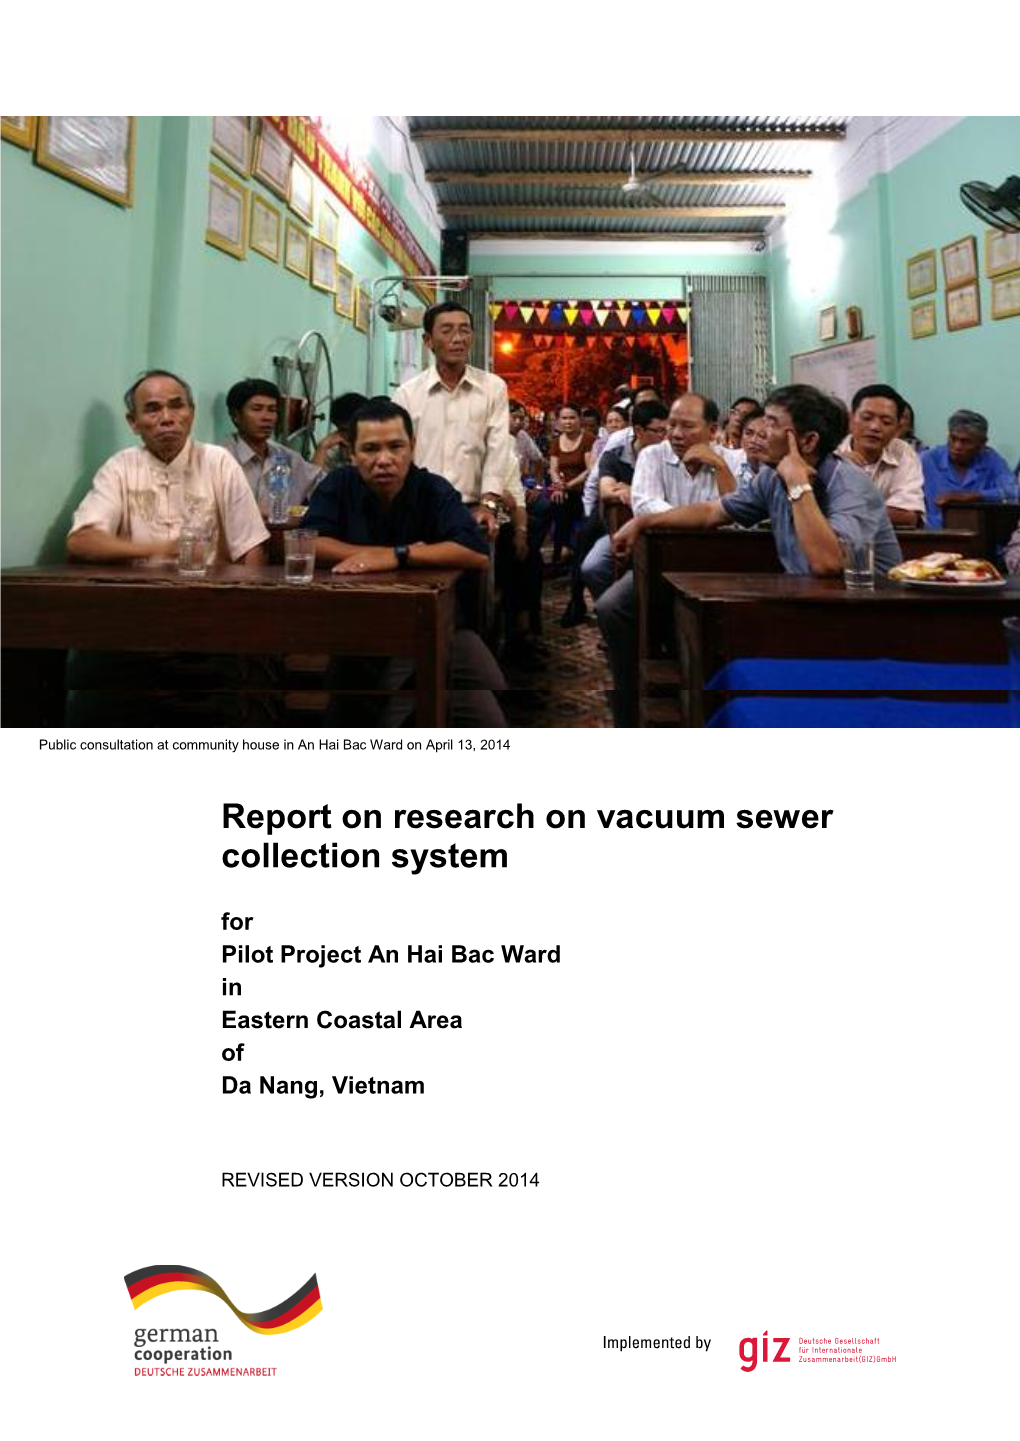 Report on Research on Vacuum Sewer Collection System